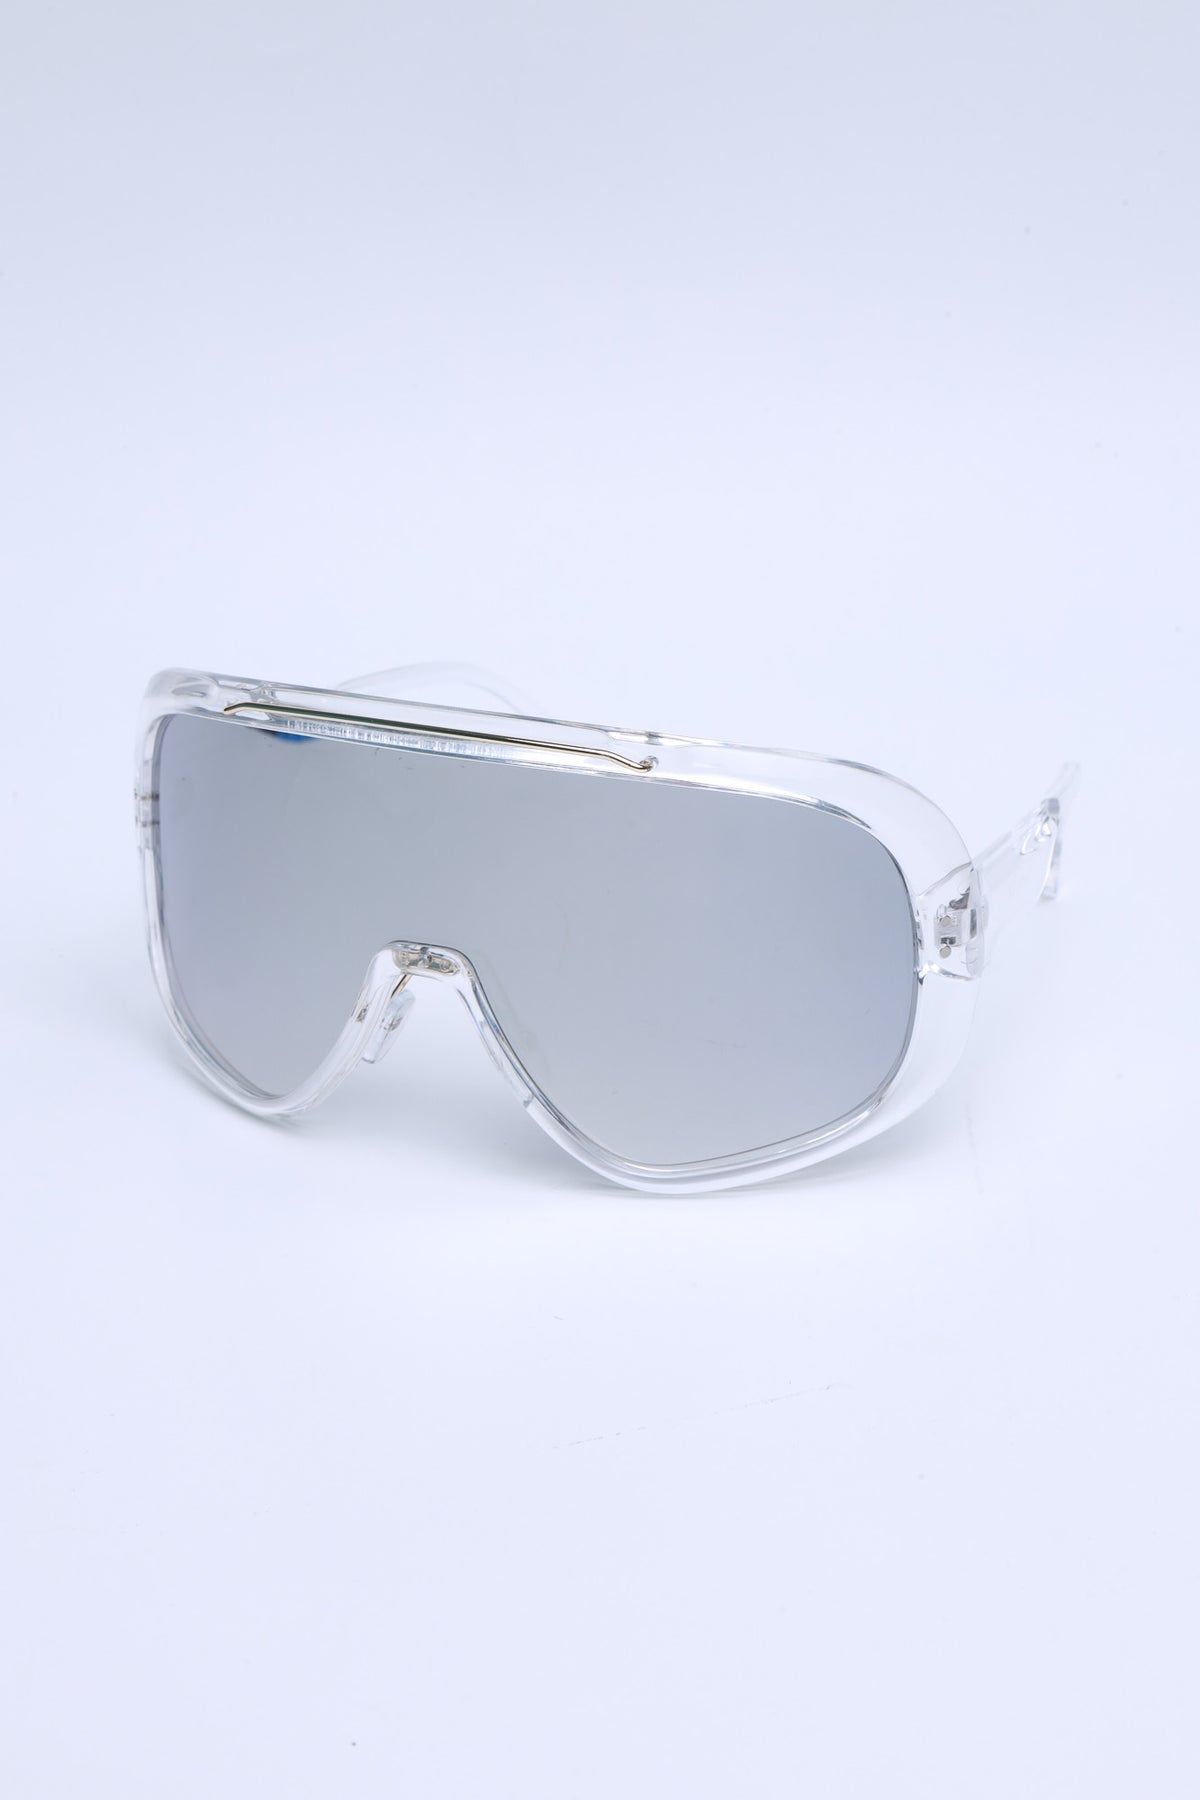 
              Undercover Curved Shield Sunglasses - Clear/Reflective - Swank A Posh
            